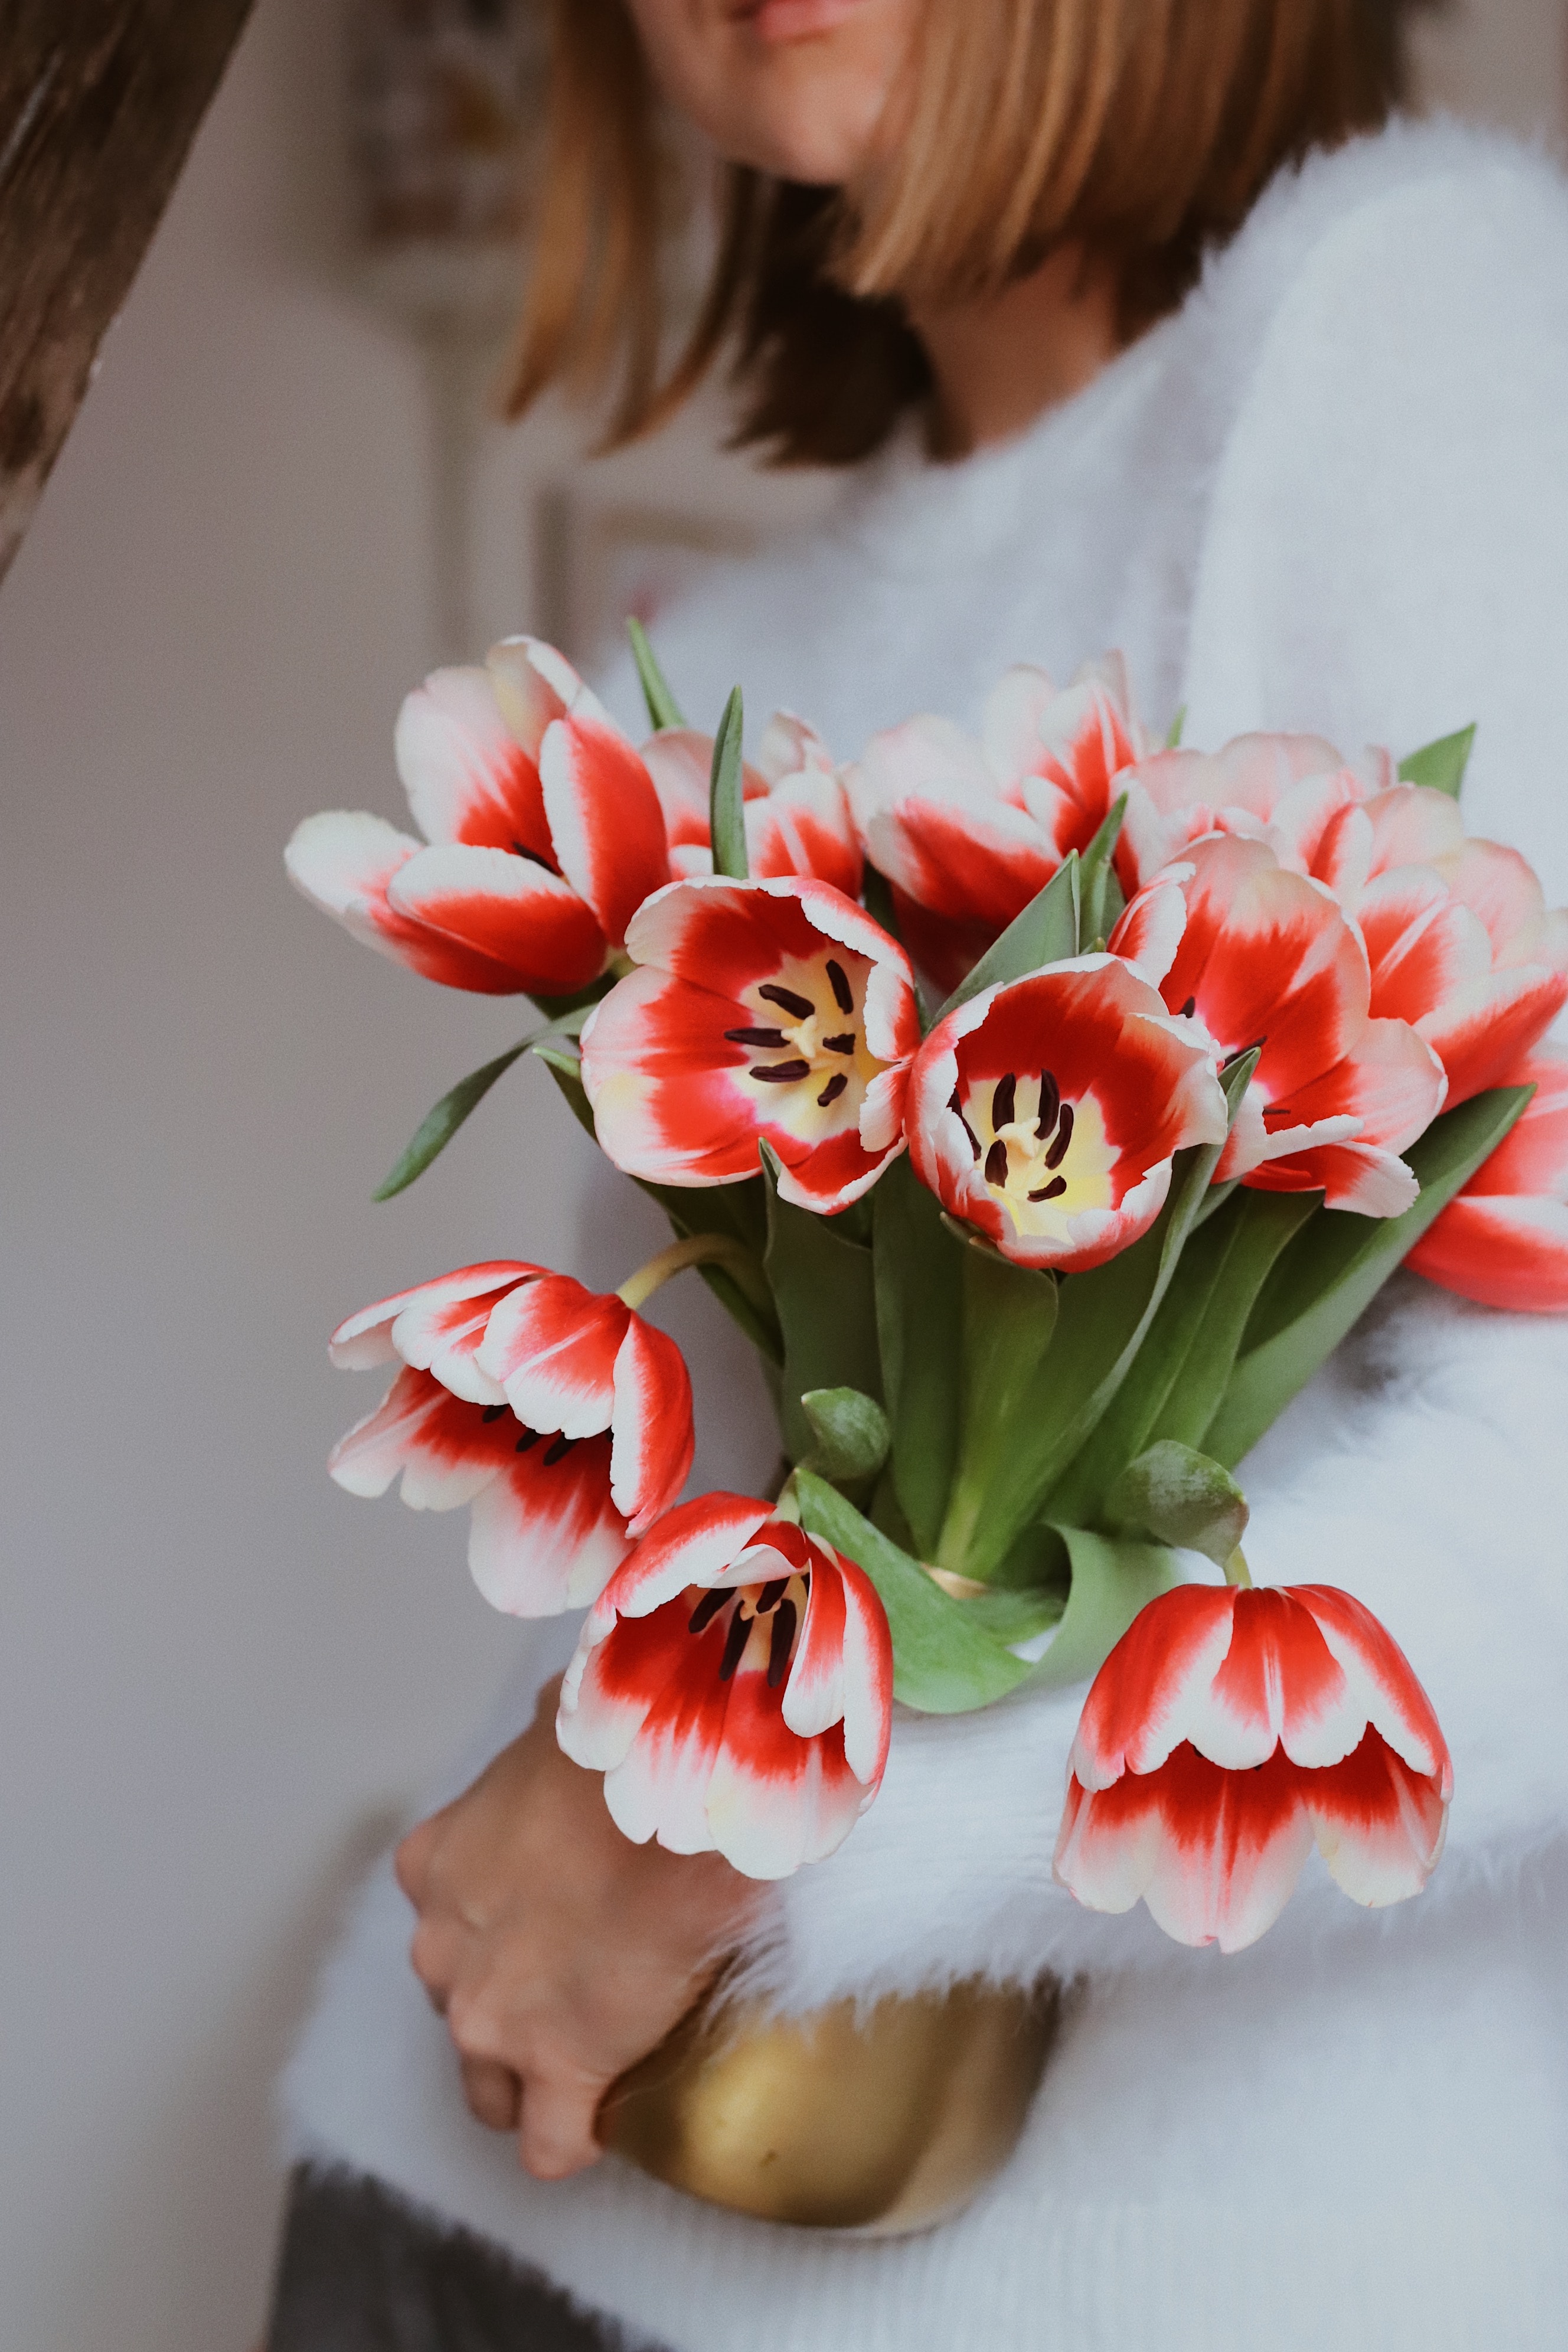 flowers, tulips, red, bouquet Image for desktop